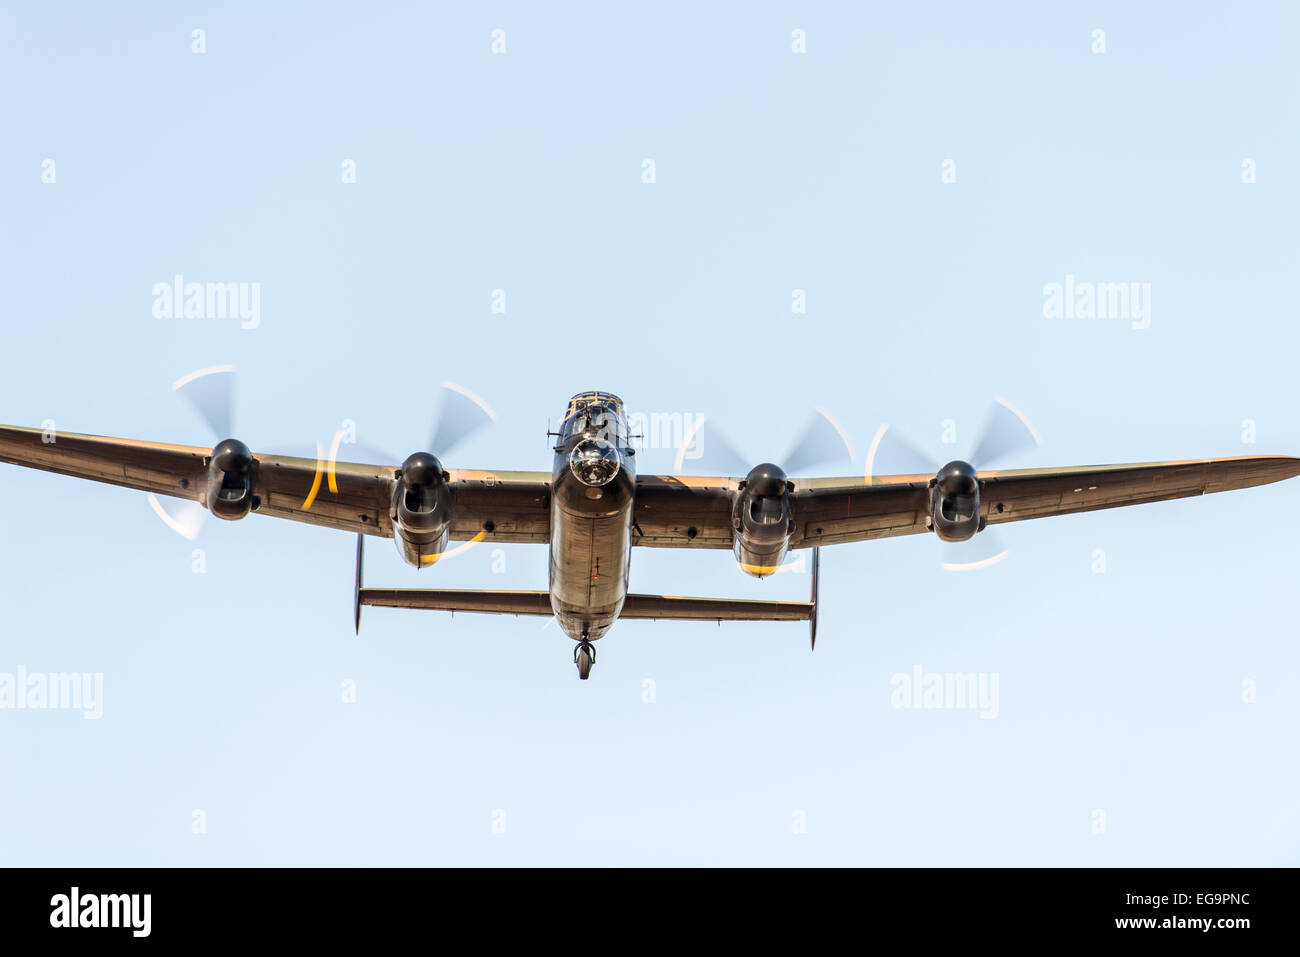 Avro Lancaster, from underneath, against pale sky Stock Photo